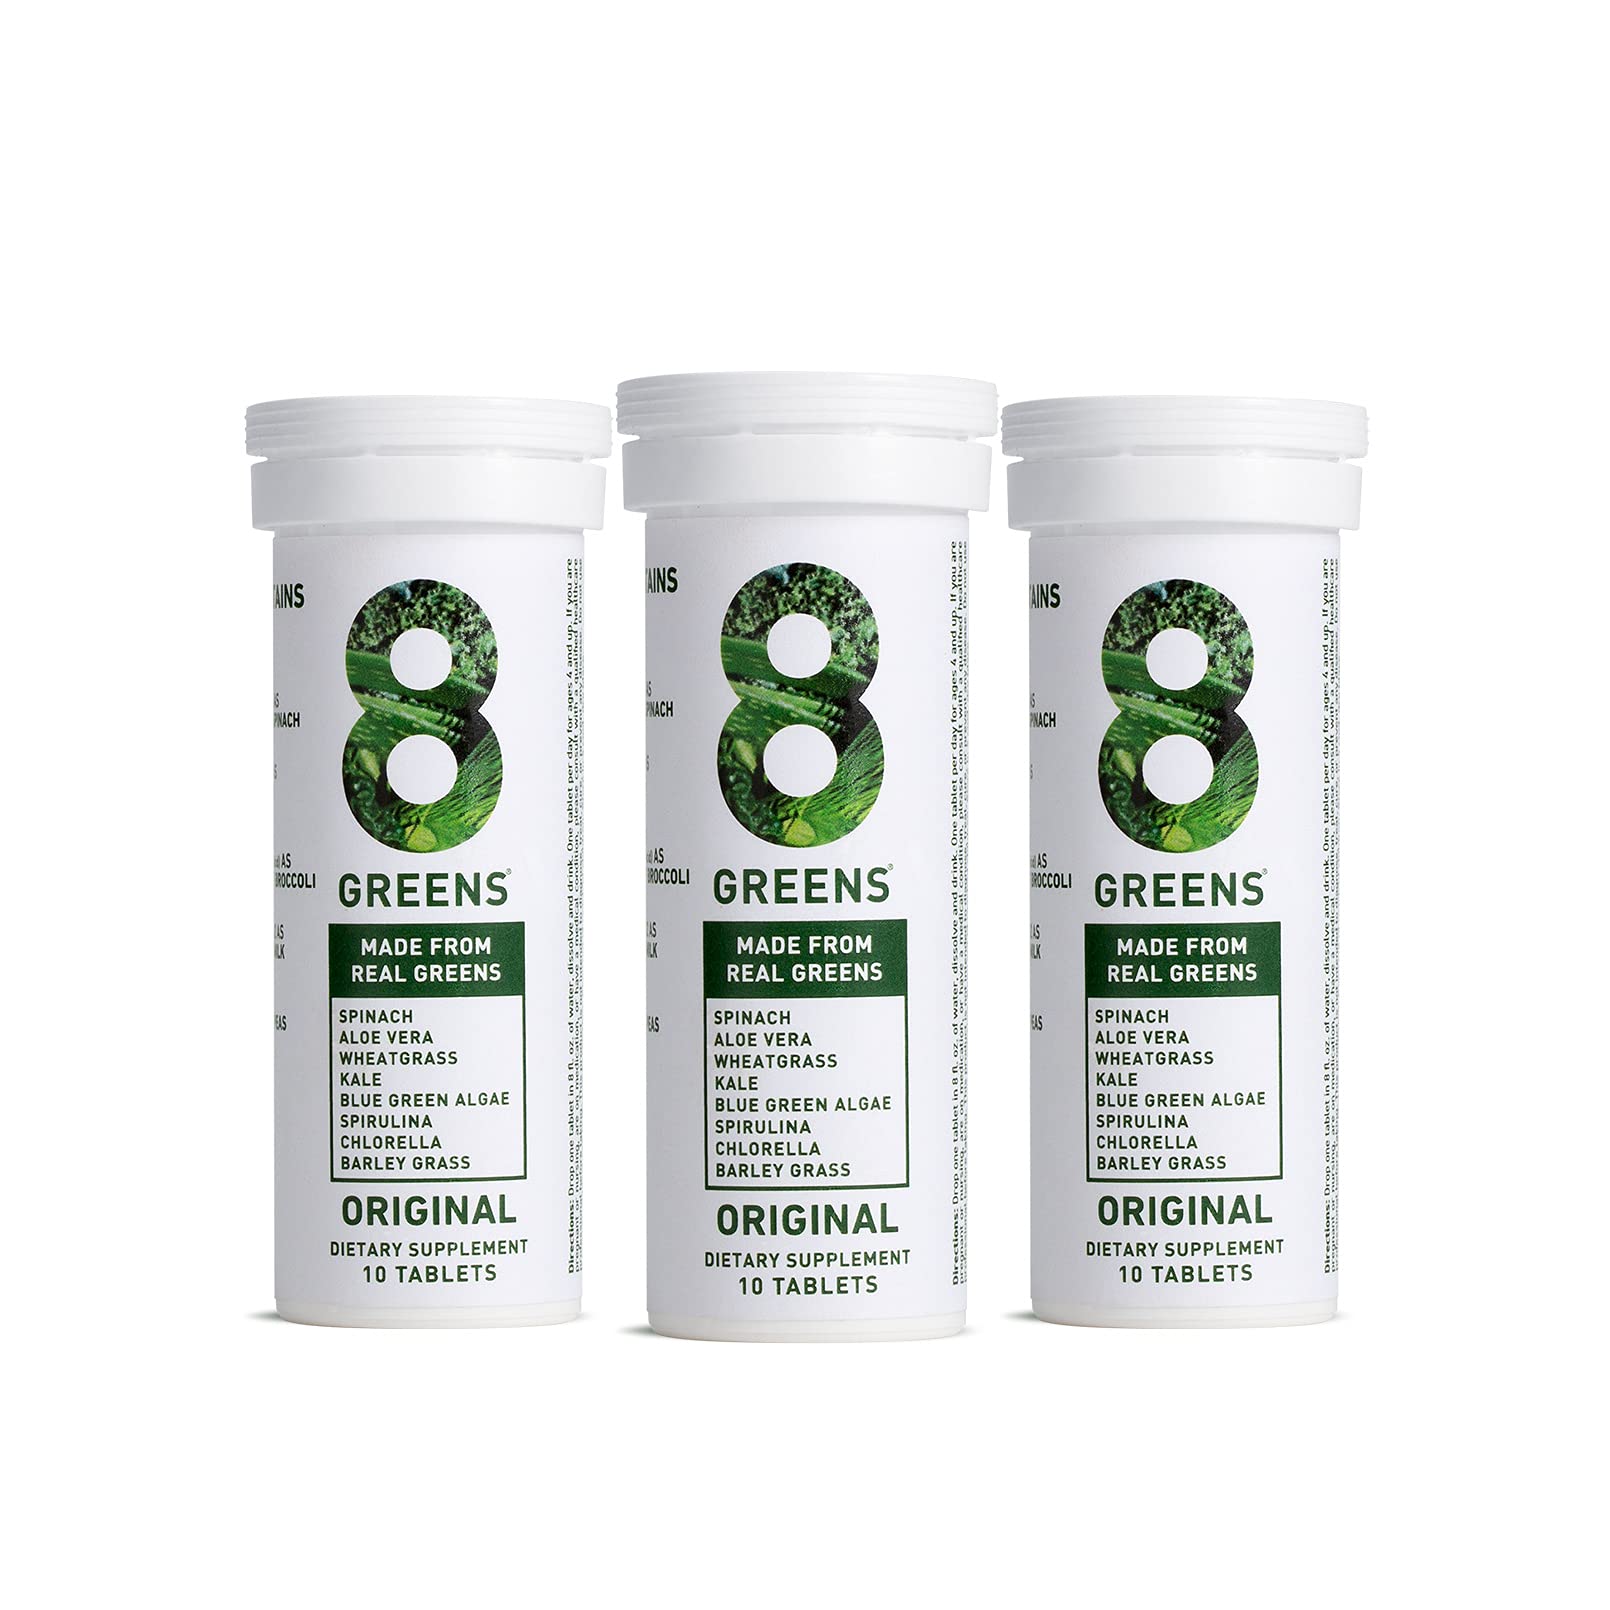 8Greens - Daily Superfood, Greens Powder, Super Greens, Vitamins, Vegan, Gluten Free, Non-GMO for Immune Support, Energy & Gut Support (3 Tubes, 30 Tablets)